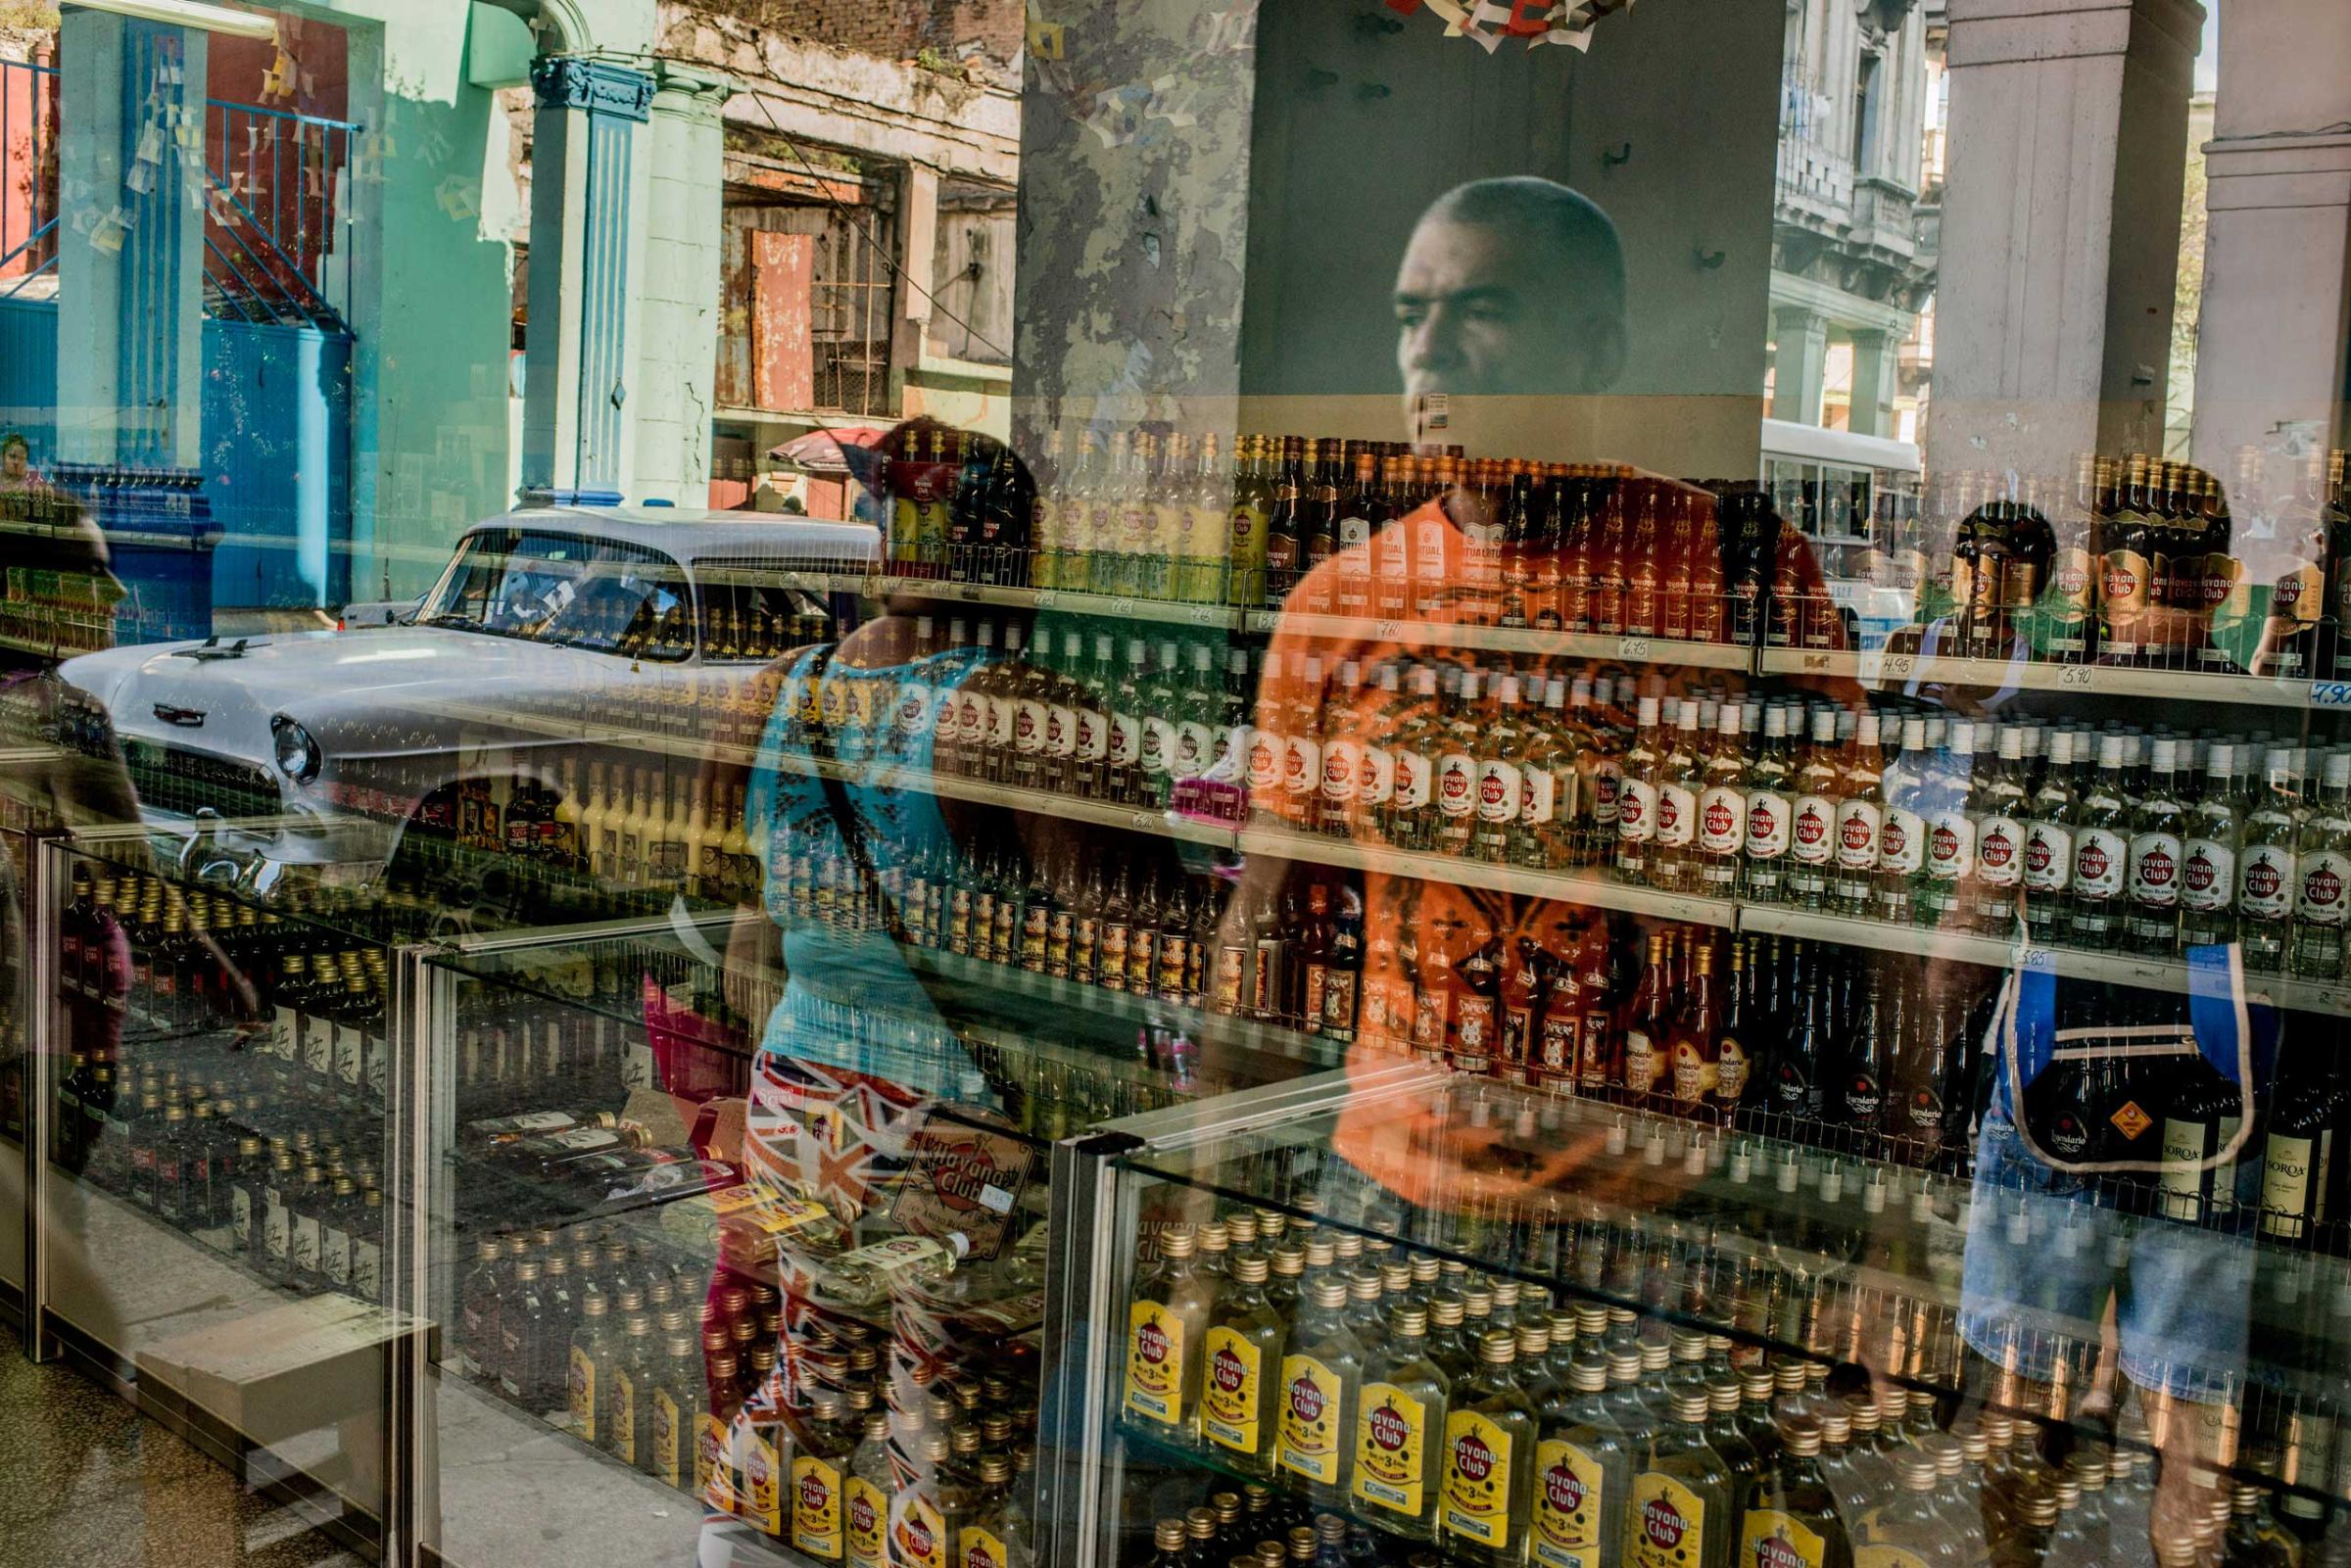 People outside a shop selling rum are reflected in the windows, in Havana, Dec. 22, 2014.